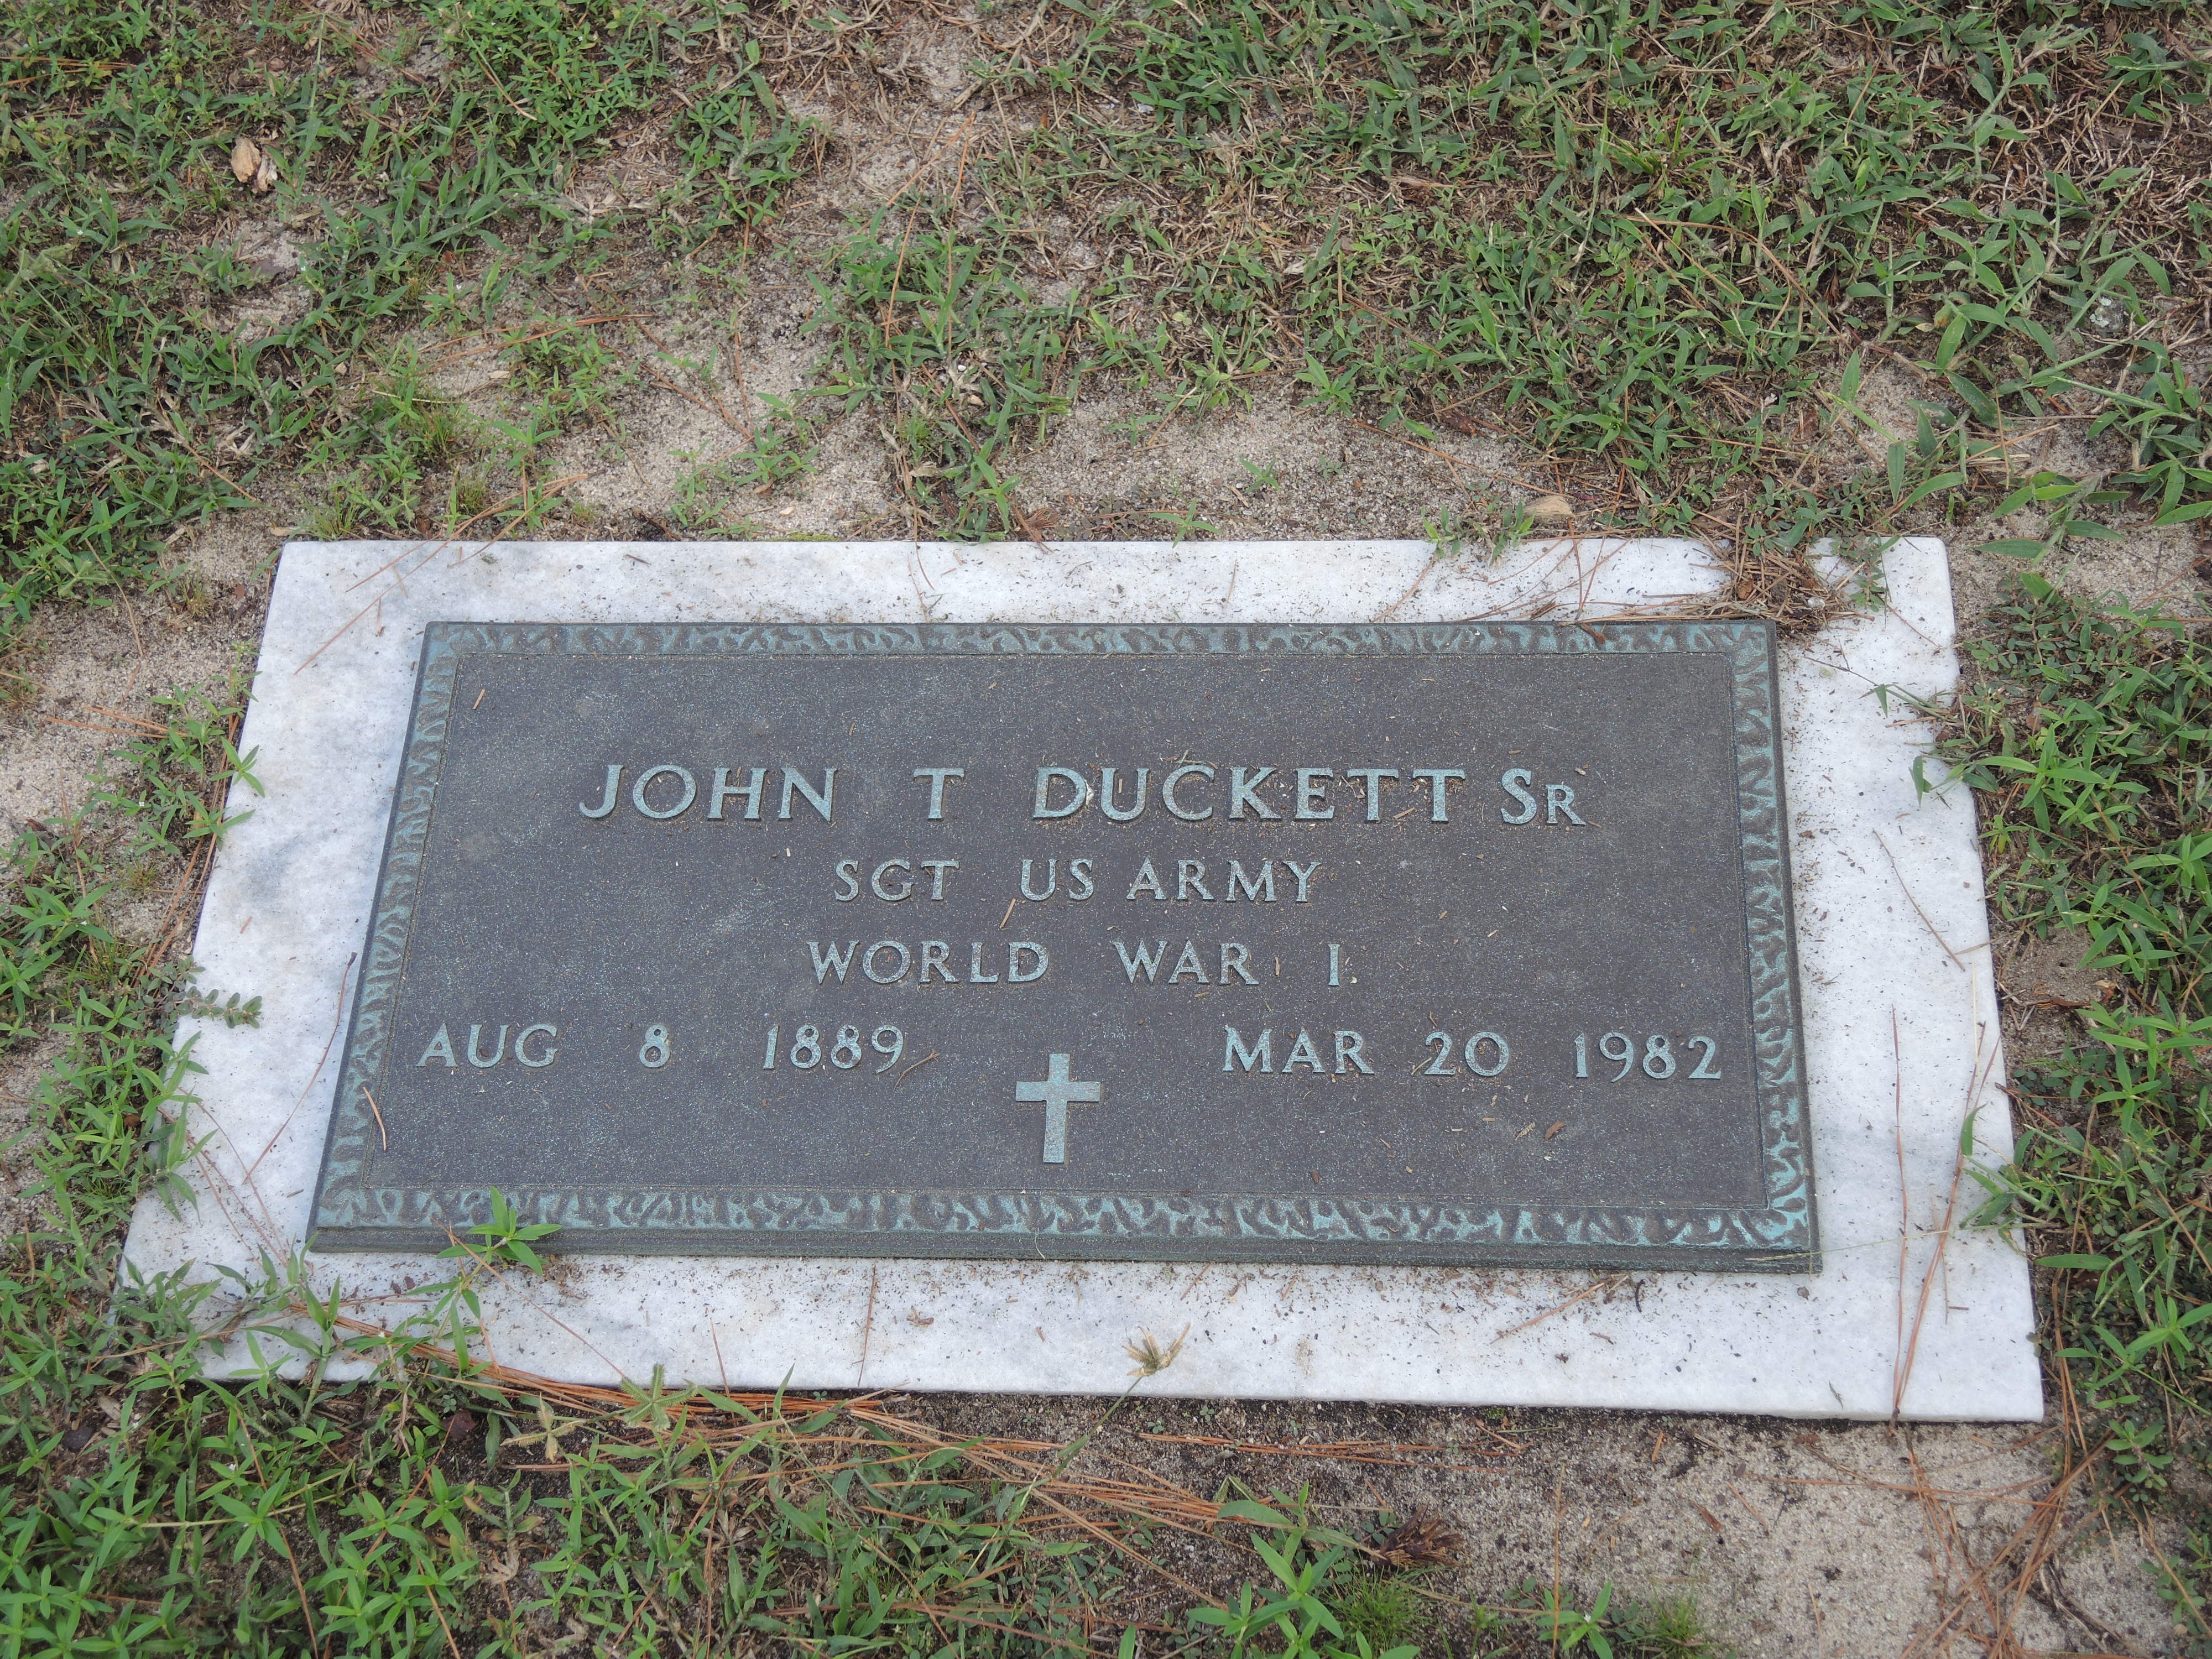 This was the oldest person I could find in the Hillcrest Cemetery.